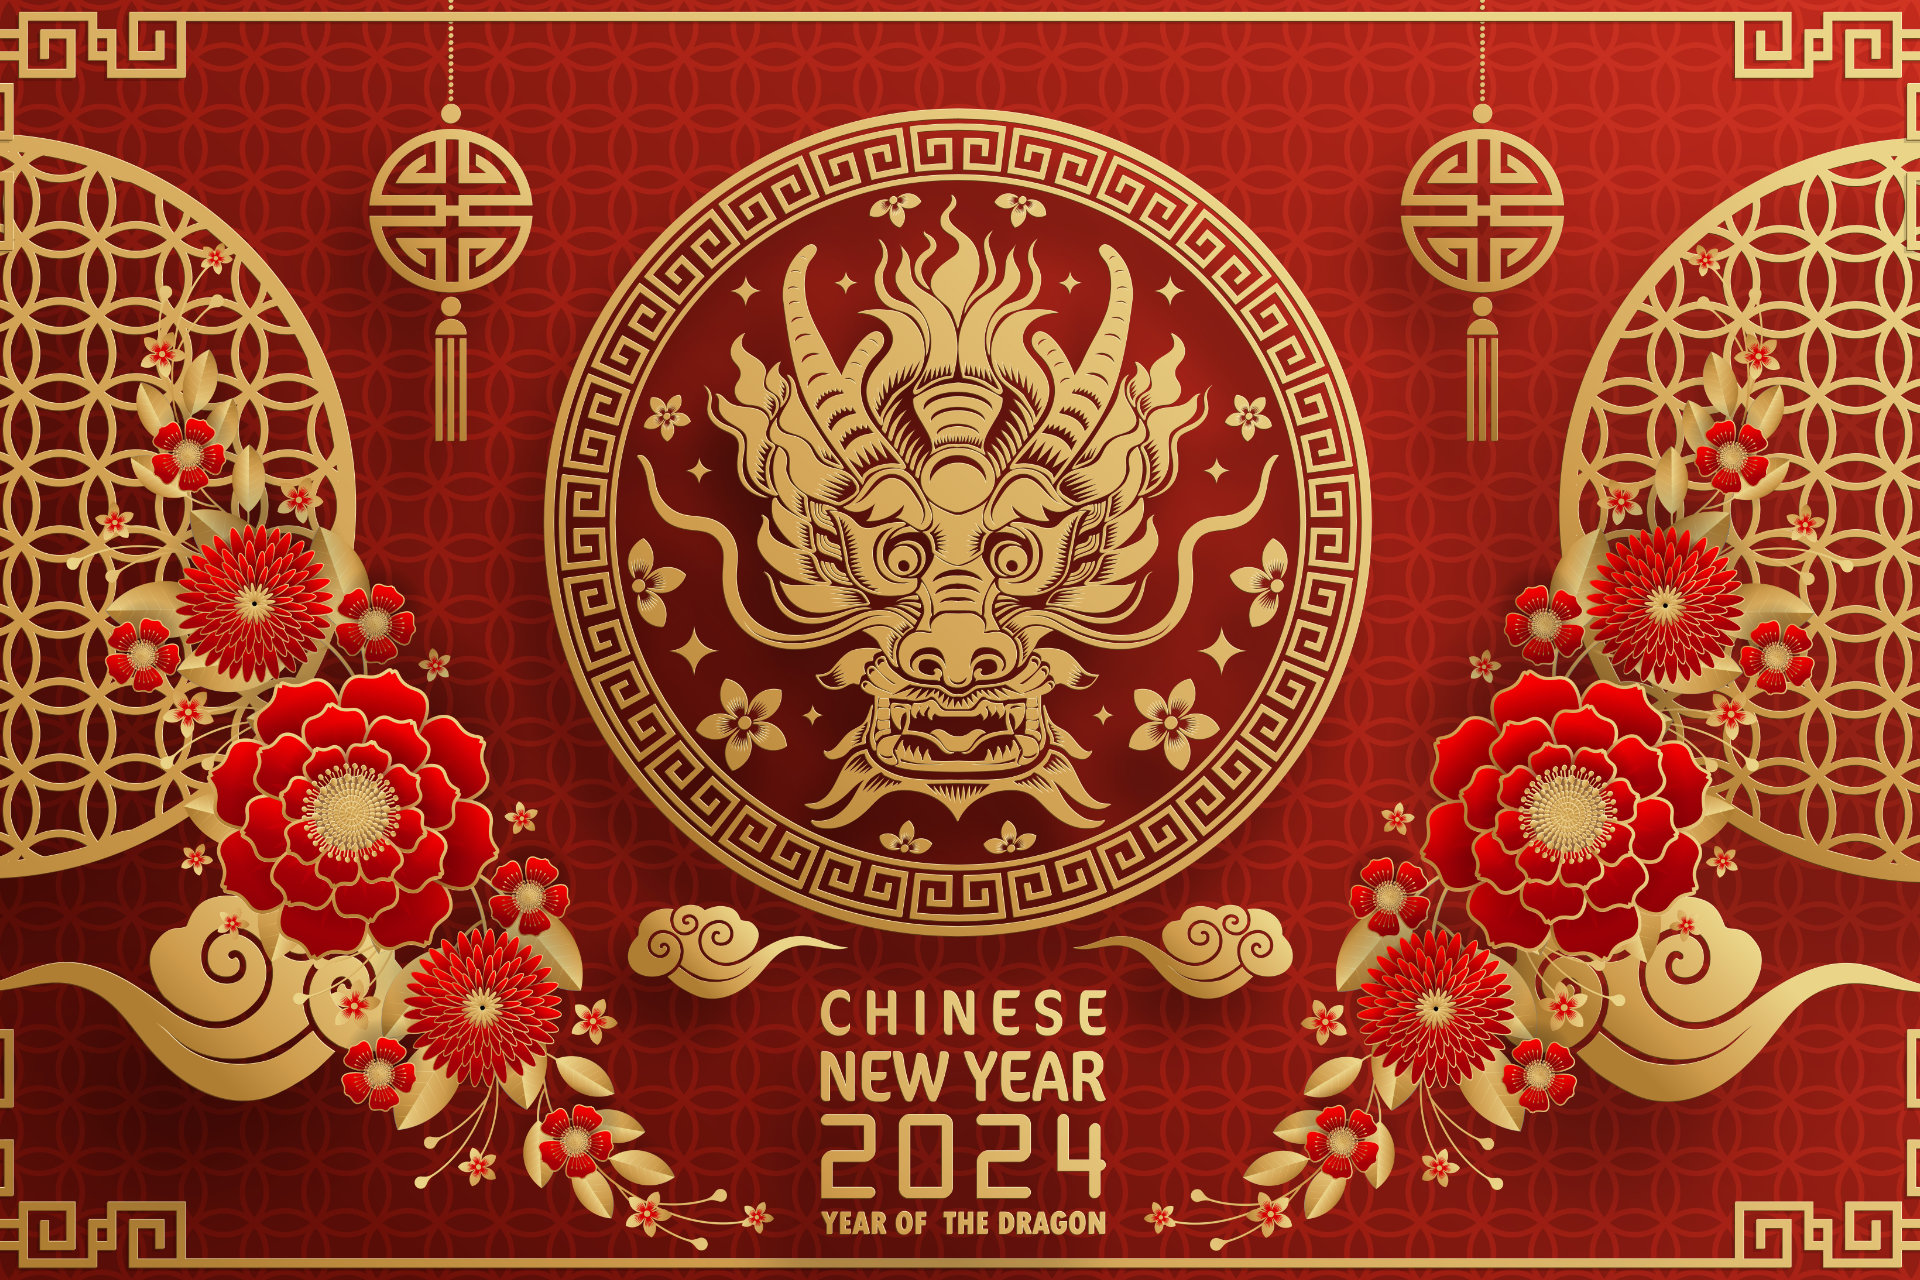 Lunar New Year 2024: Year of the Dragon, Chinese New Year